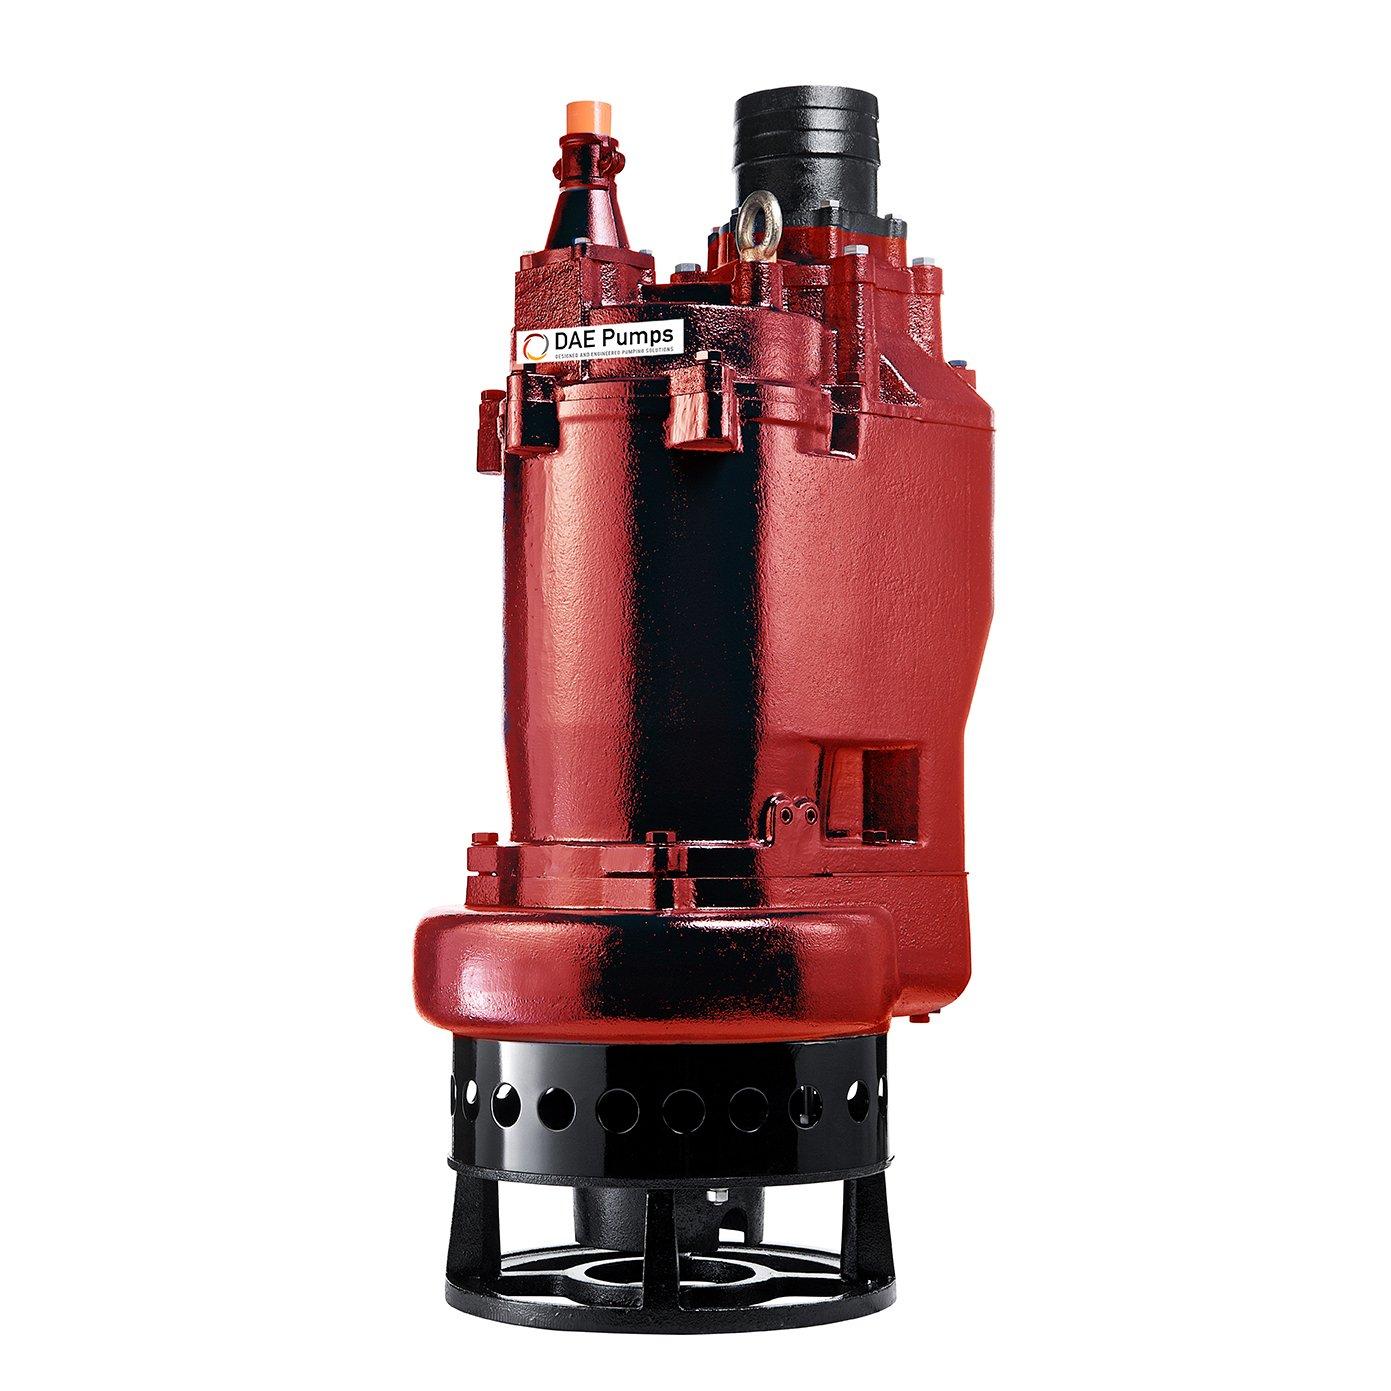 Product Tampa 6220 | Submersible Sand and Slurry Pumps | DAE Pumps image